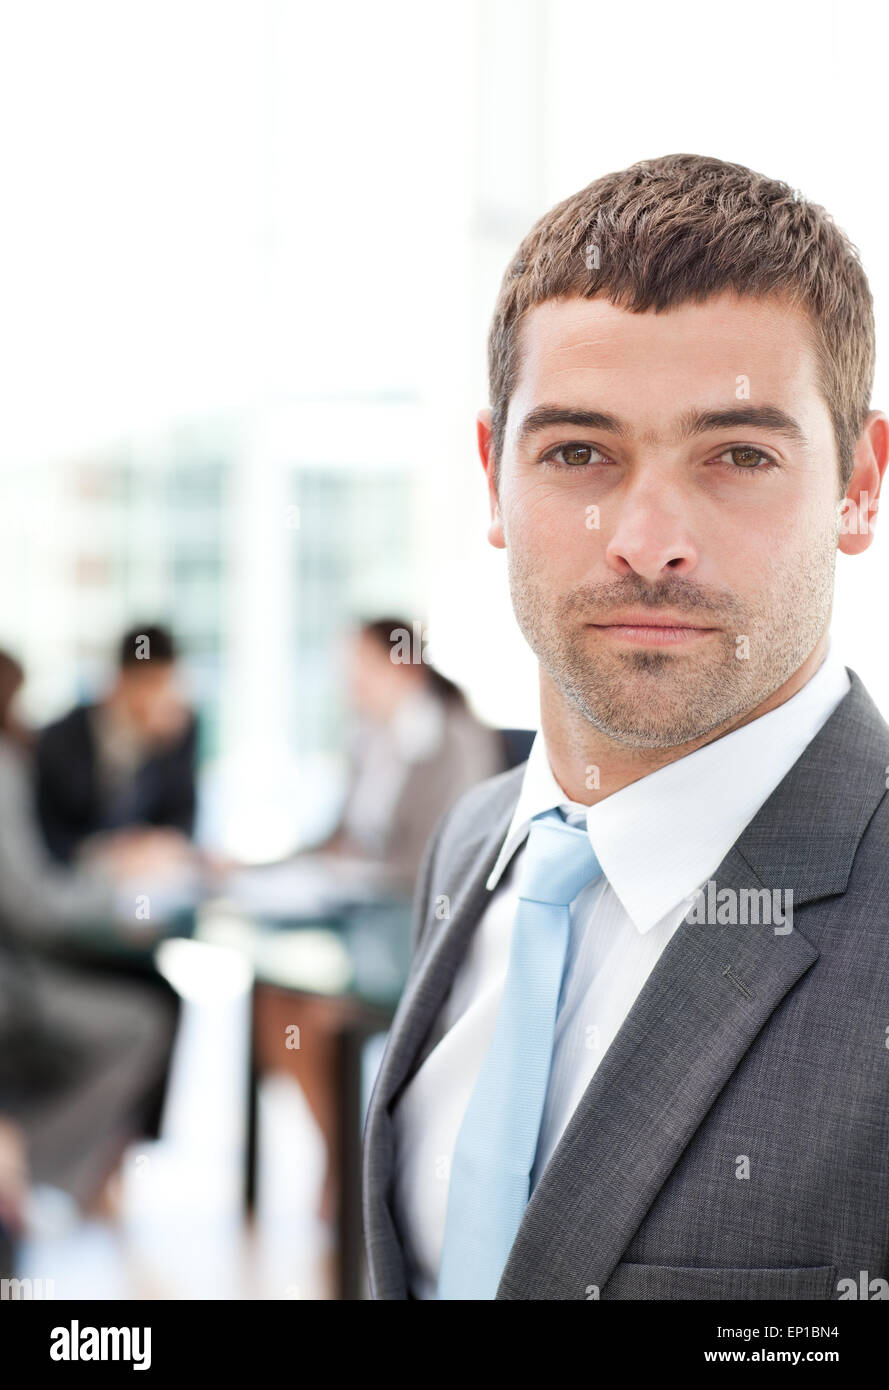 Charismatic businessman standing in the foreground Stock Photo